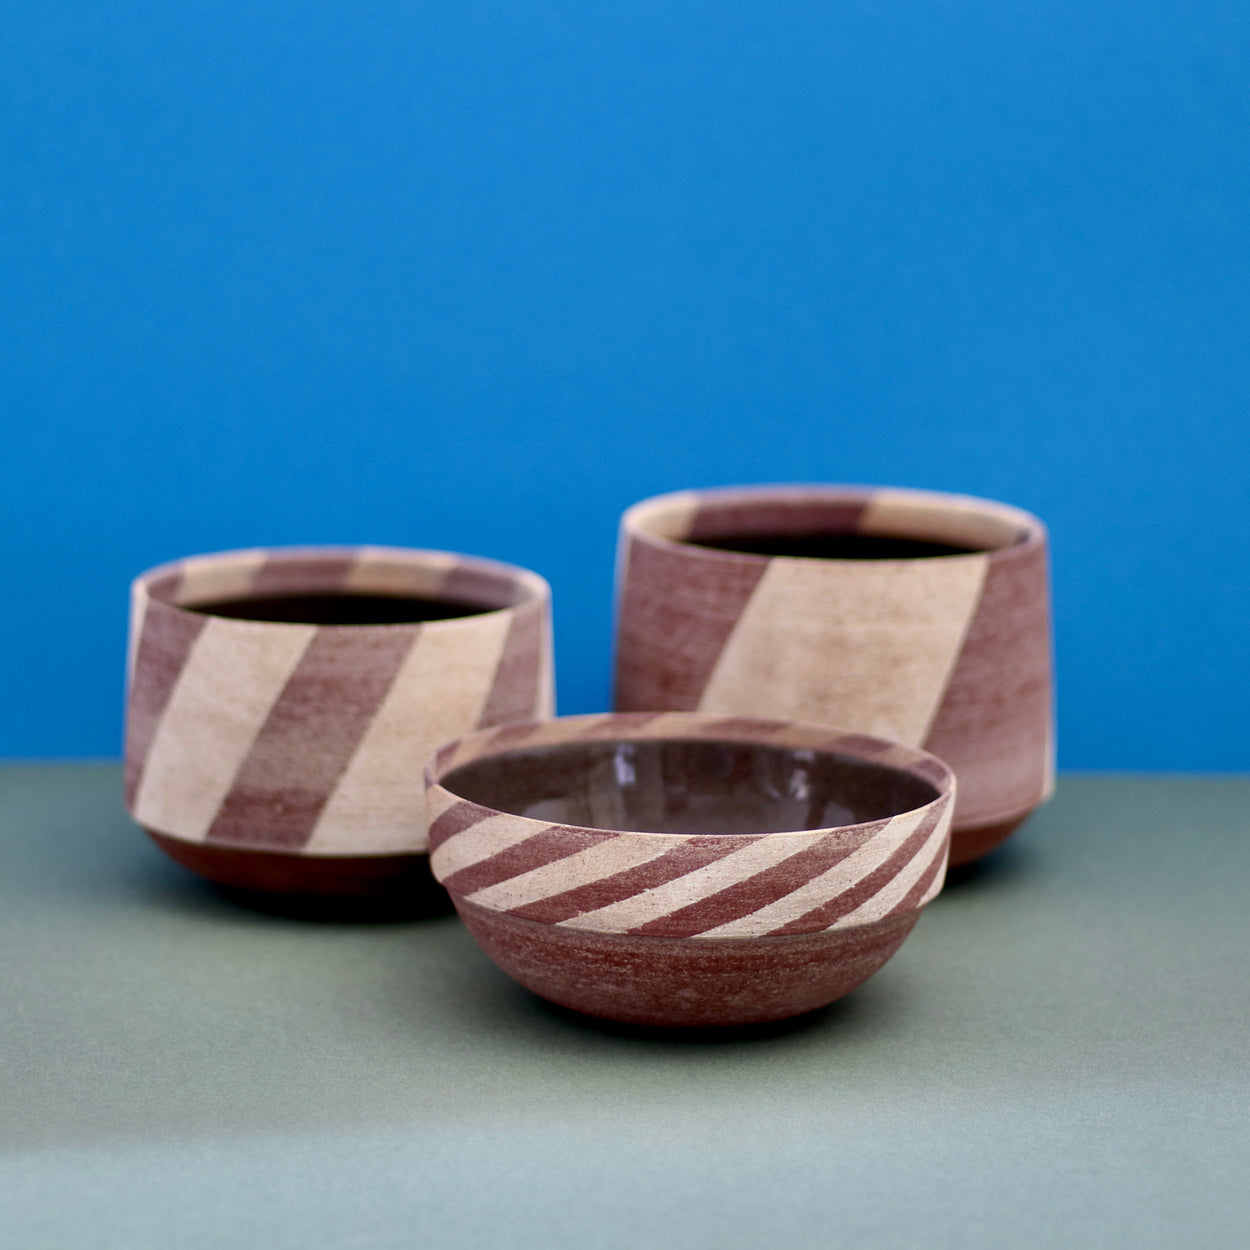 Group of three Ceramic Stripe Bowls by Amanda-Sue Rope with blue green background.